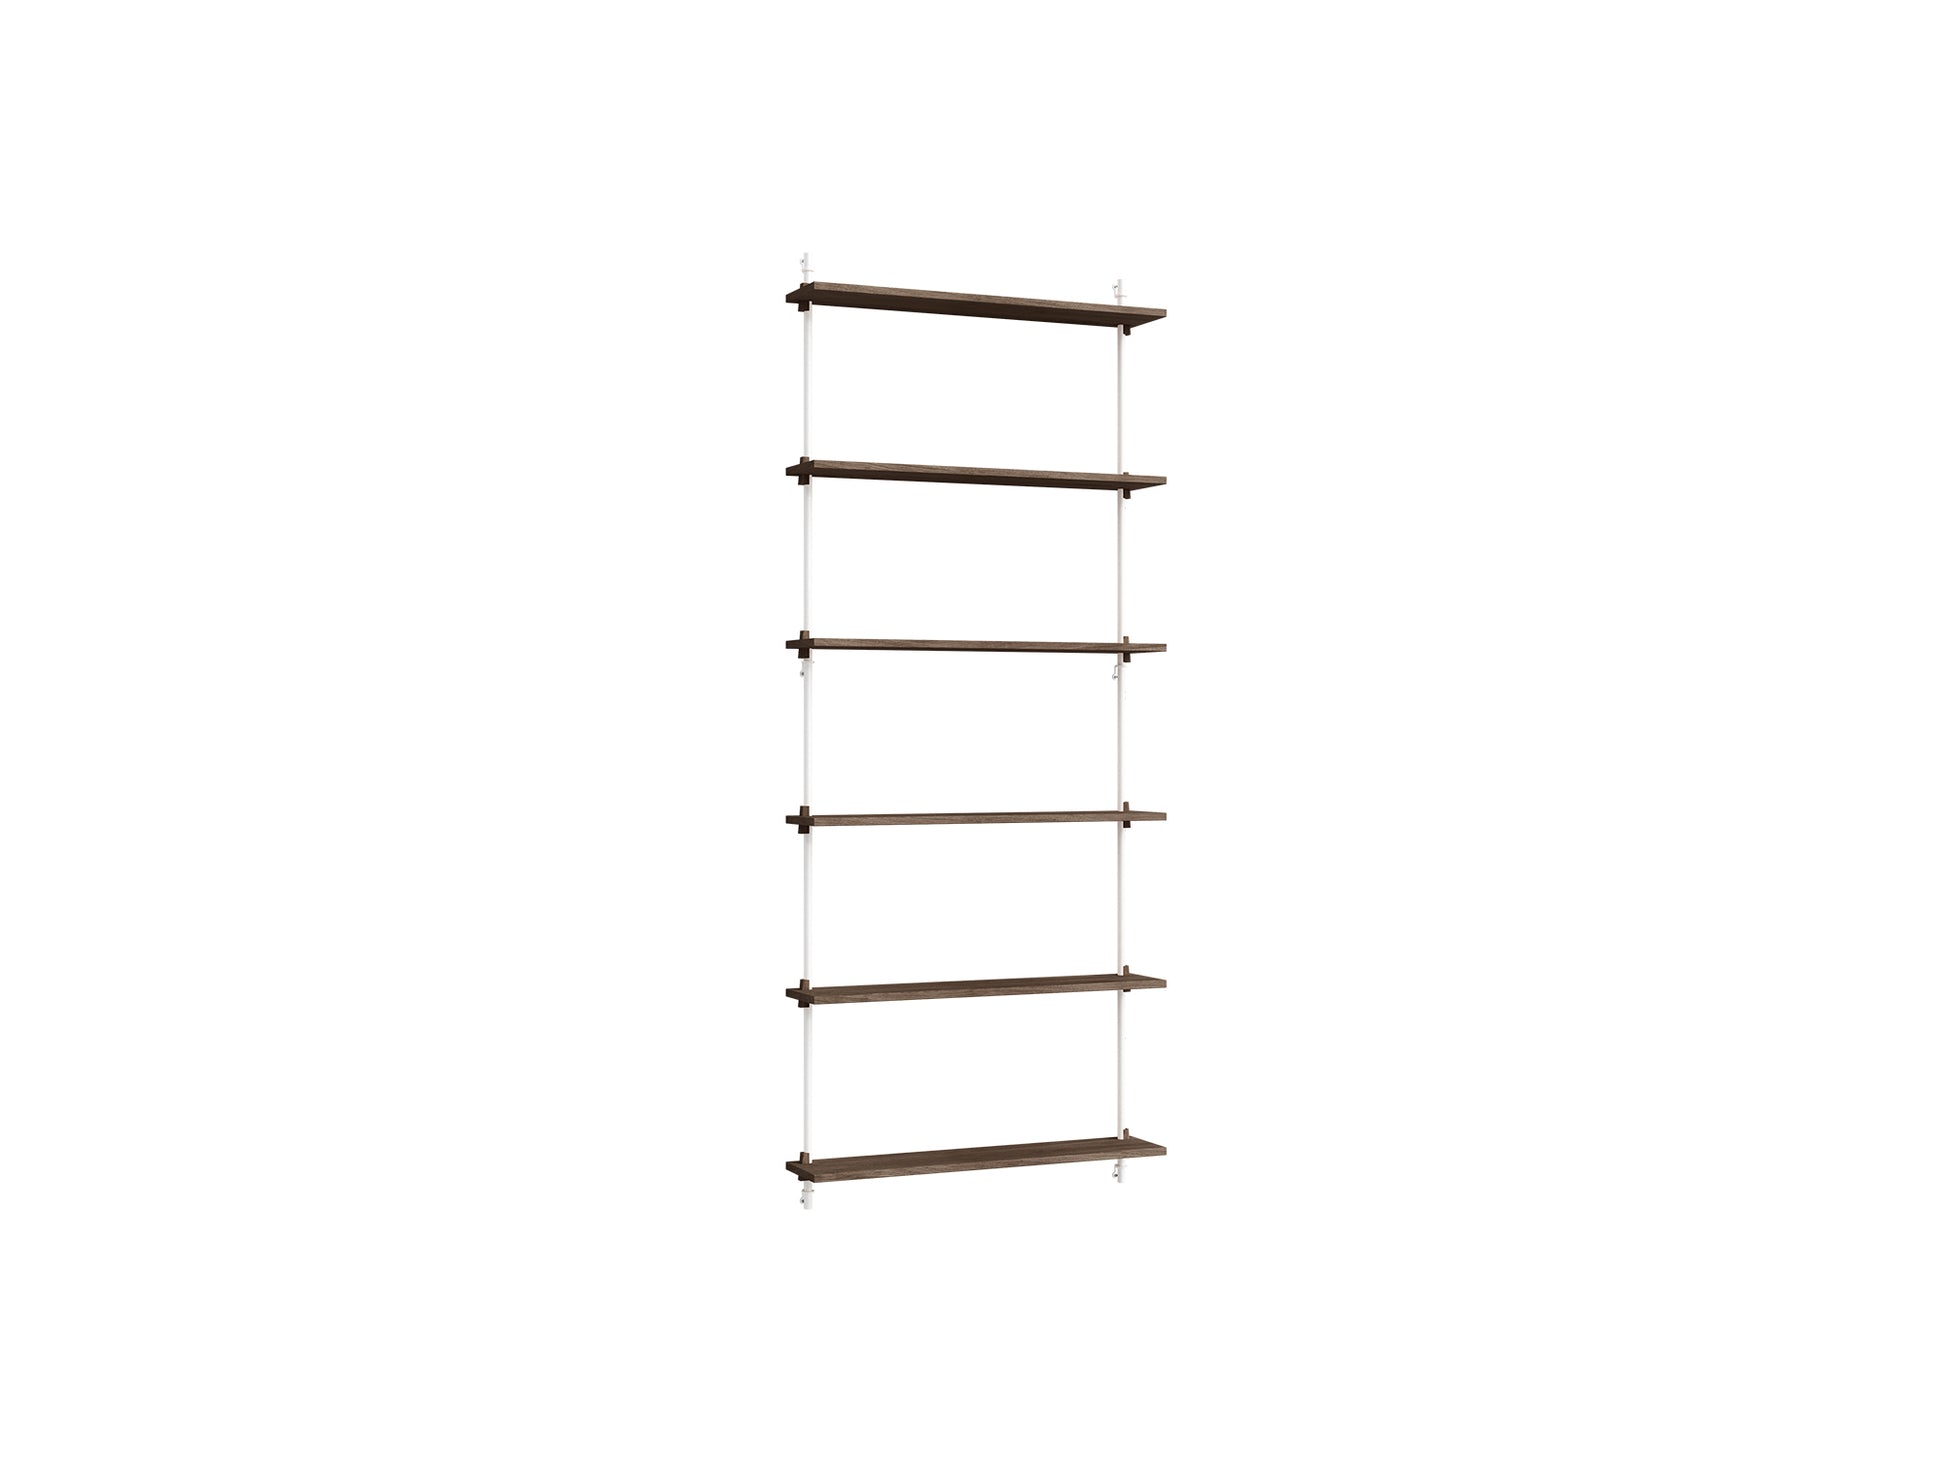 Wall Shelving System Sets (200 cm) by Moebe - WS.200.1 / Wall Shelving System Sets (200 cm) by Moebe - WS.200.1 / White Uprights / Smoked Oak